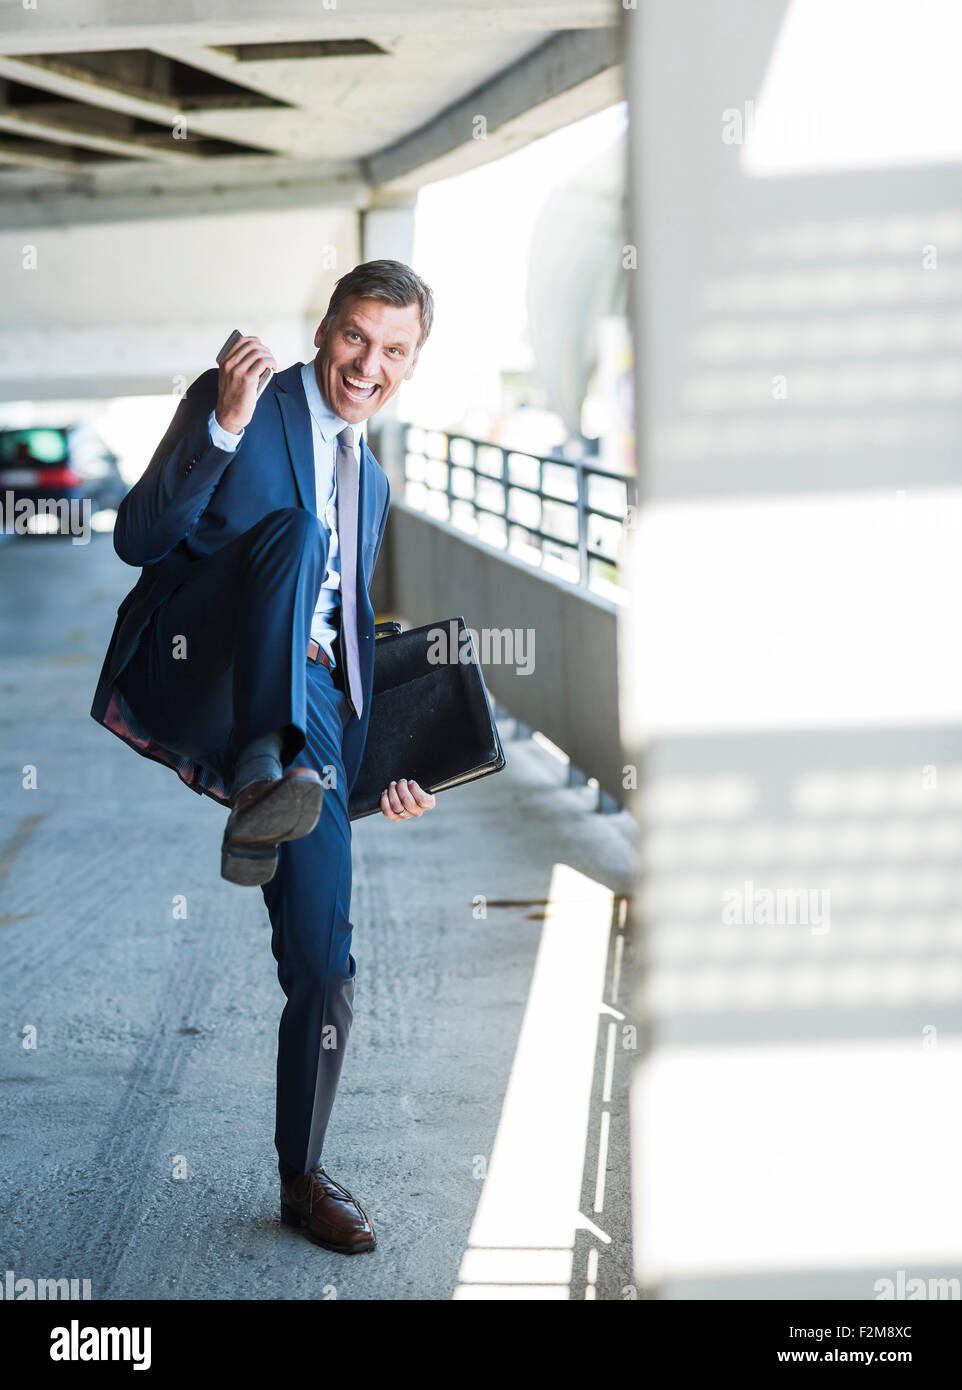 Successful businessman cheering on park deck Stock Photo